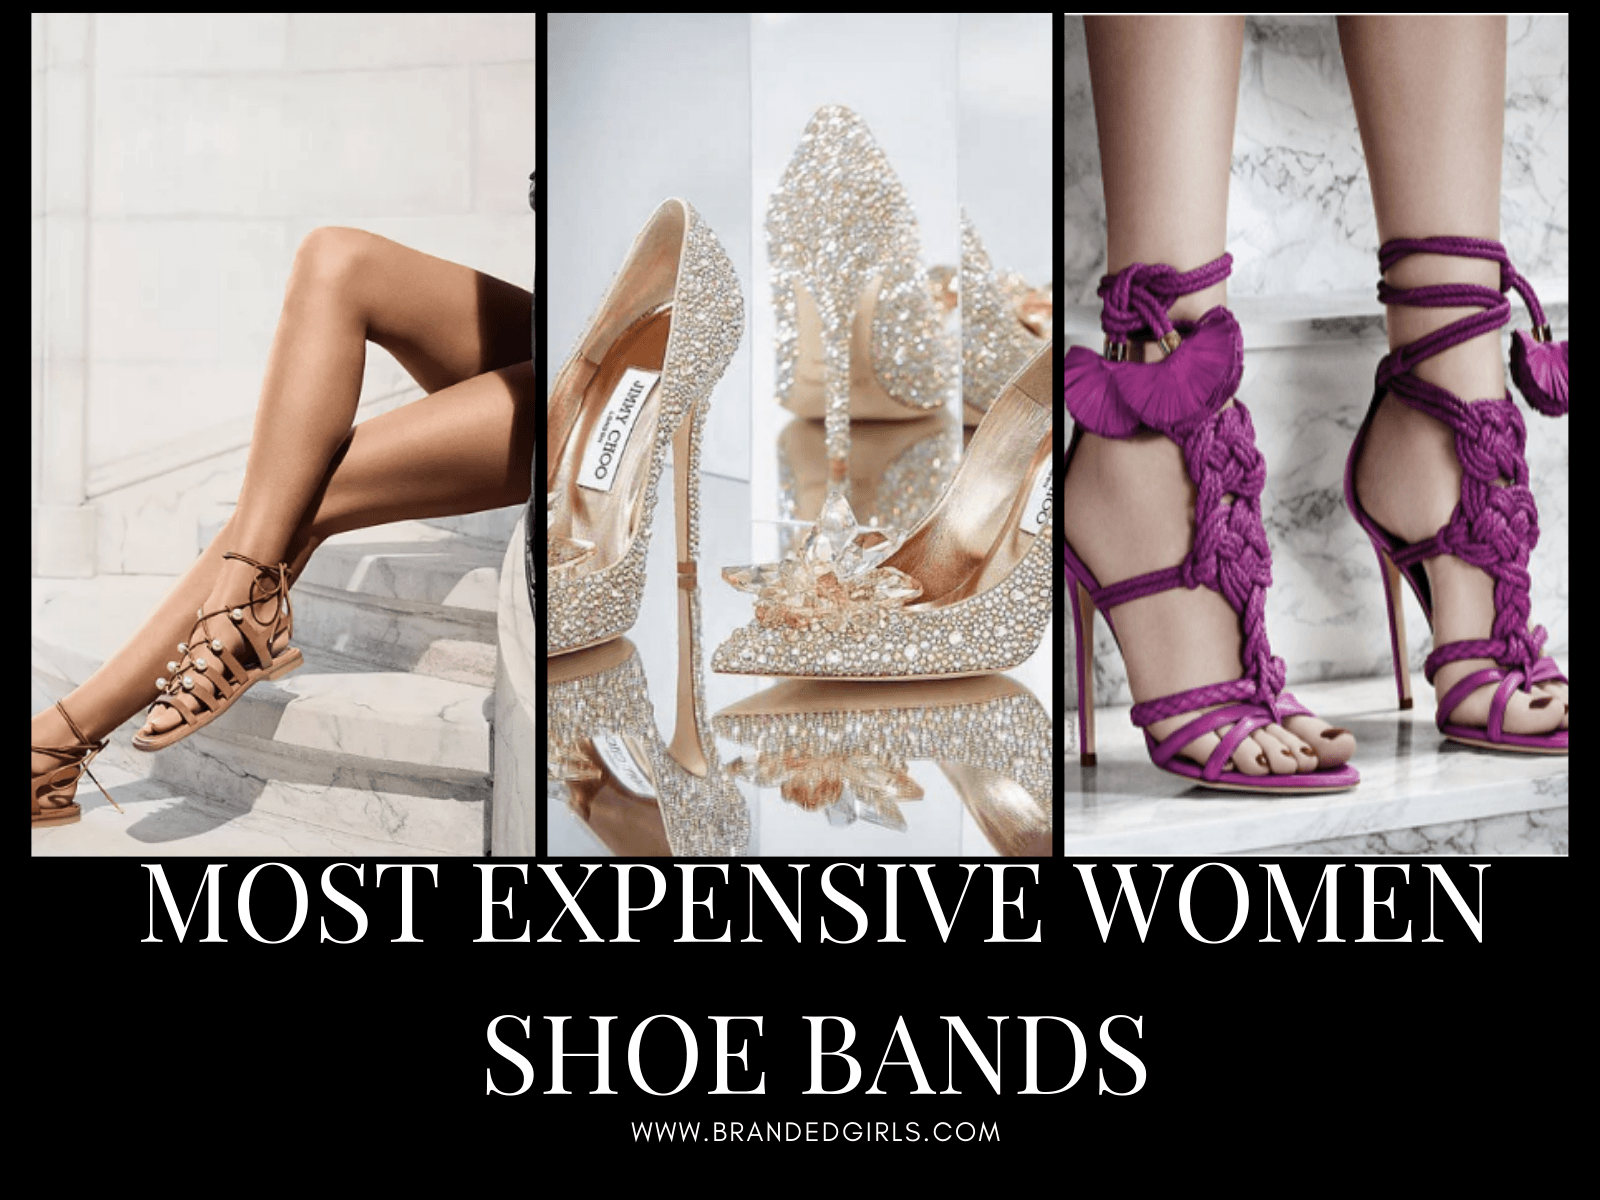 Top 10 Most Expensive Shoe Brands For Women 